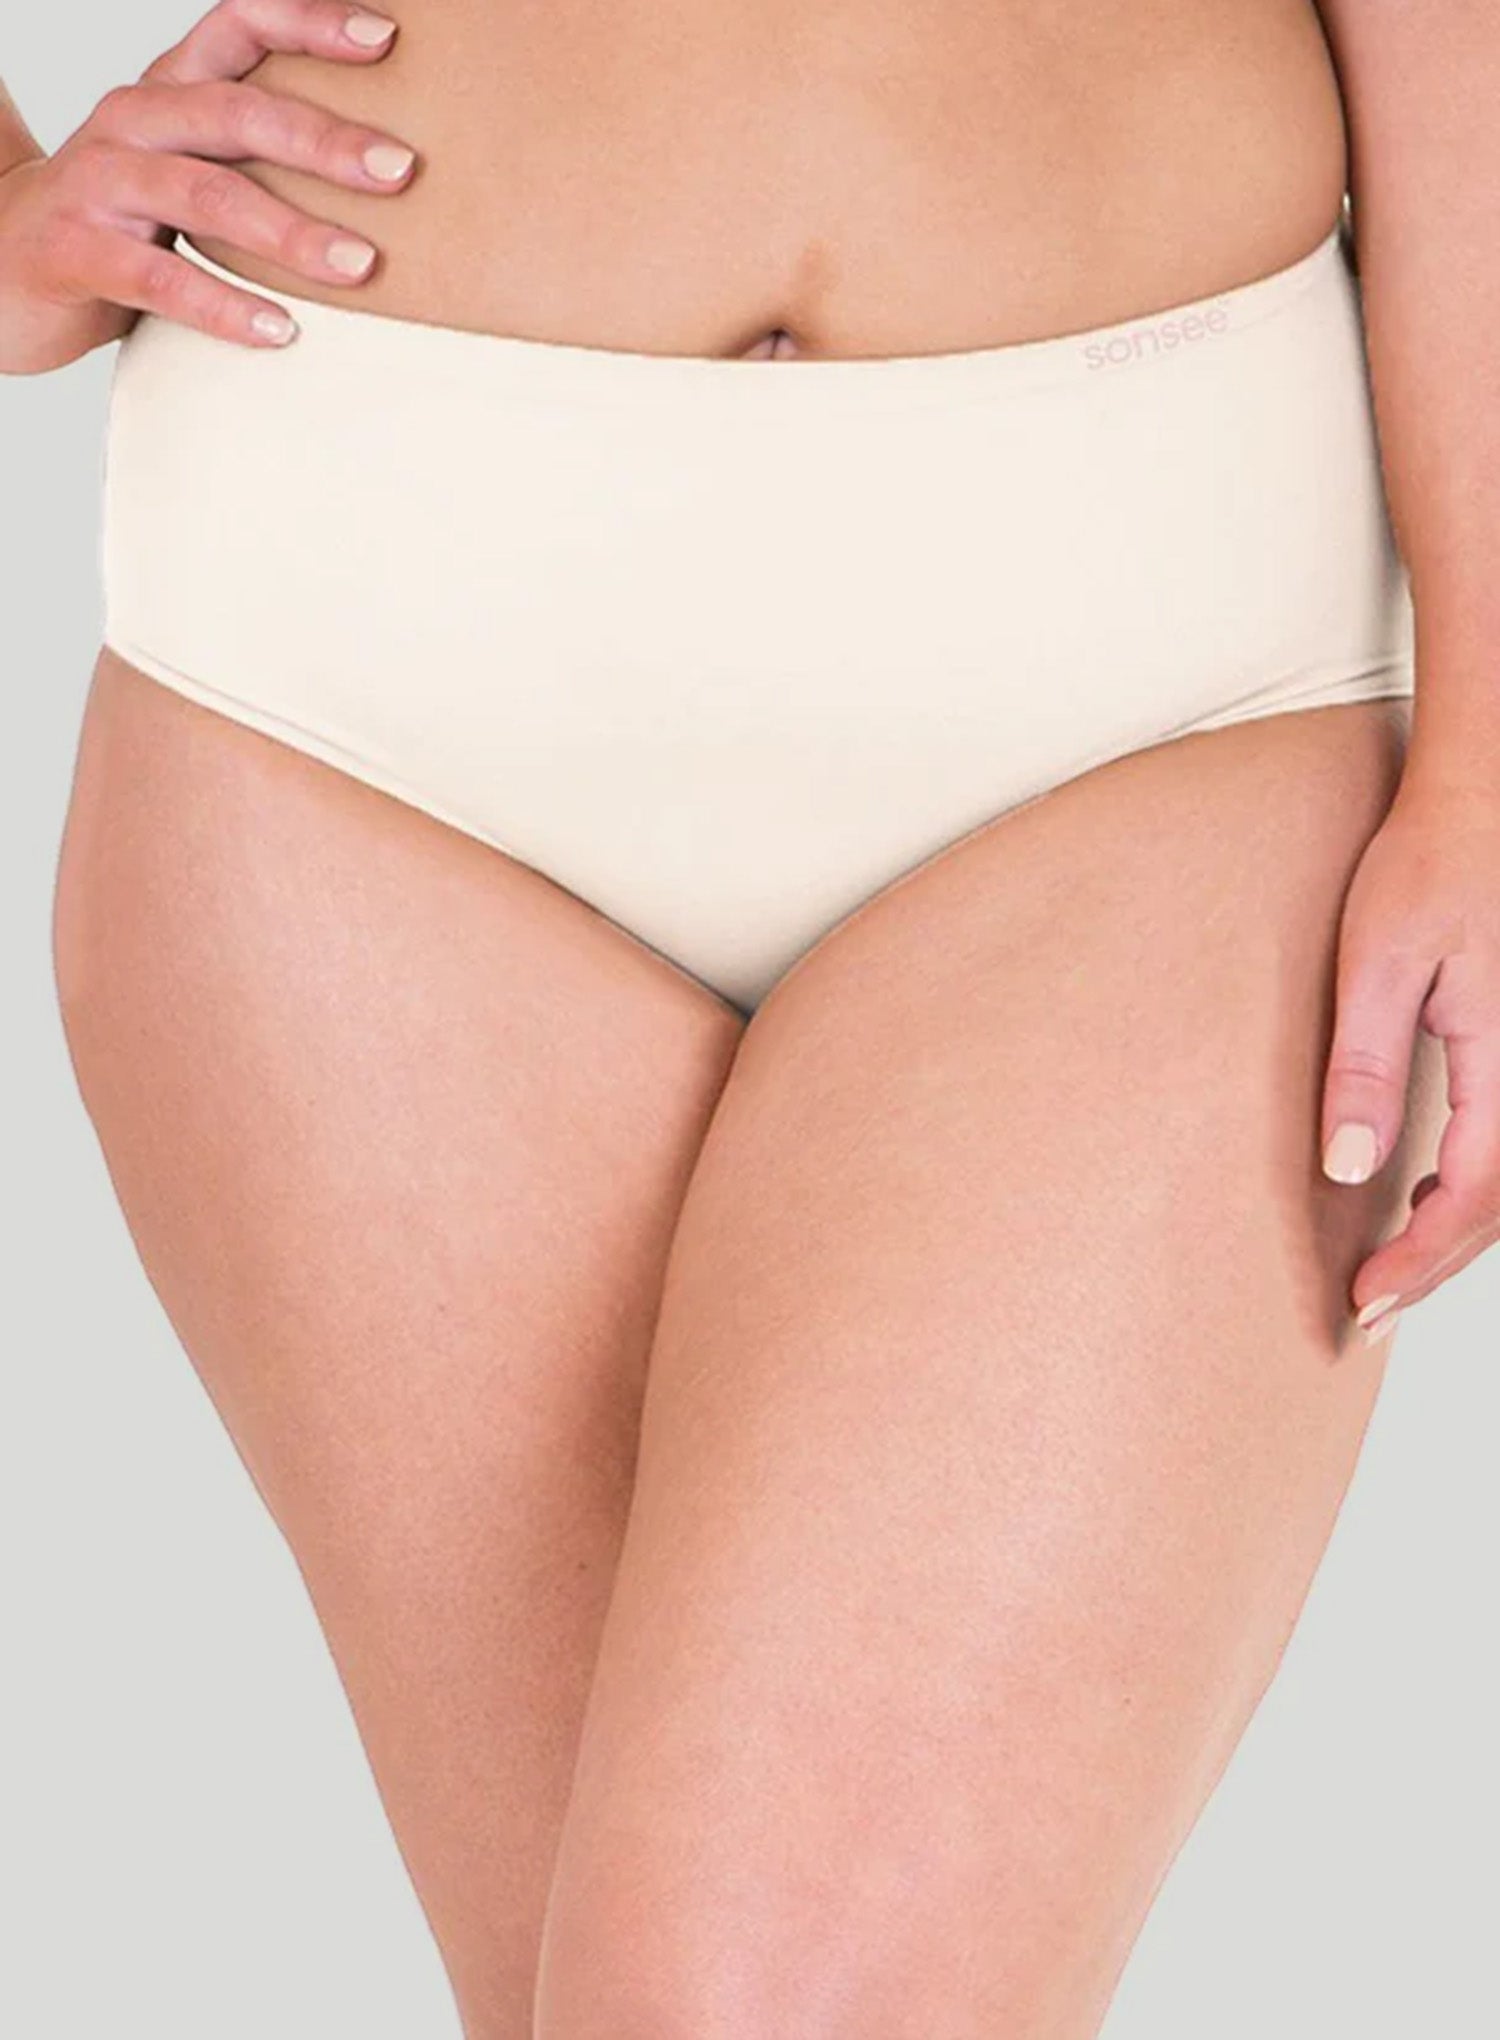 Sonsee Anti Chafing Lightweight Breathable Plus Size Underwear